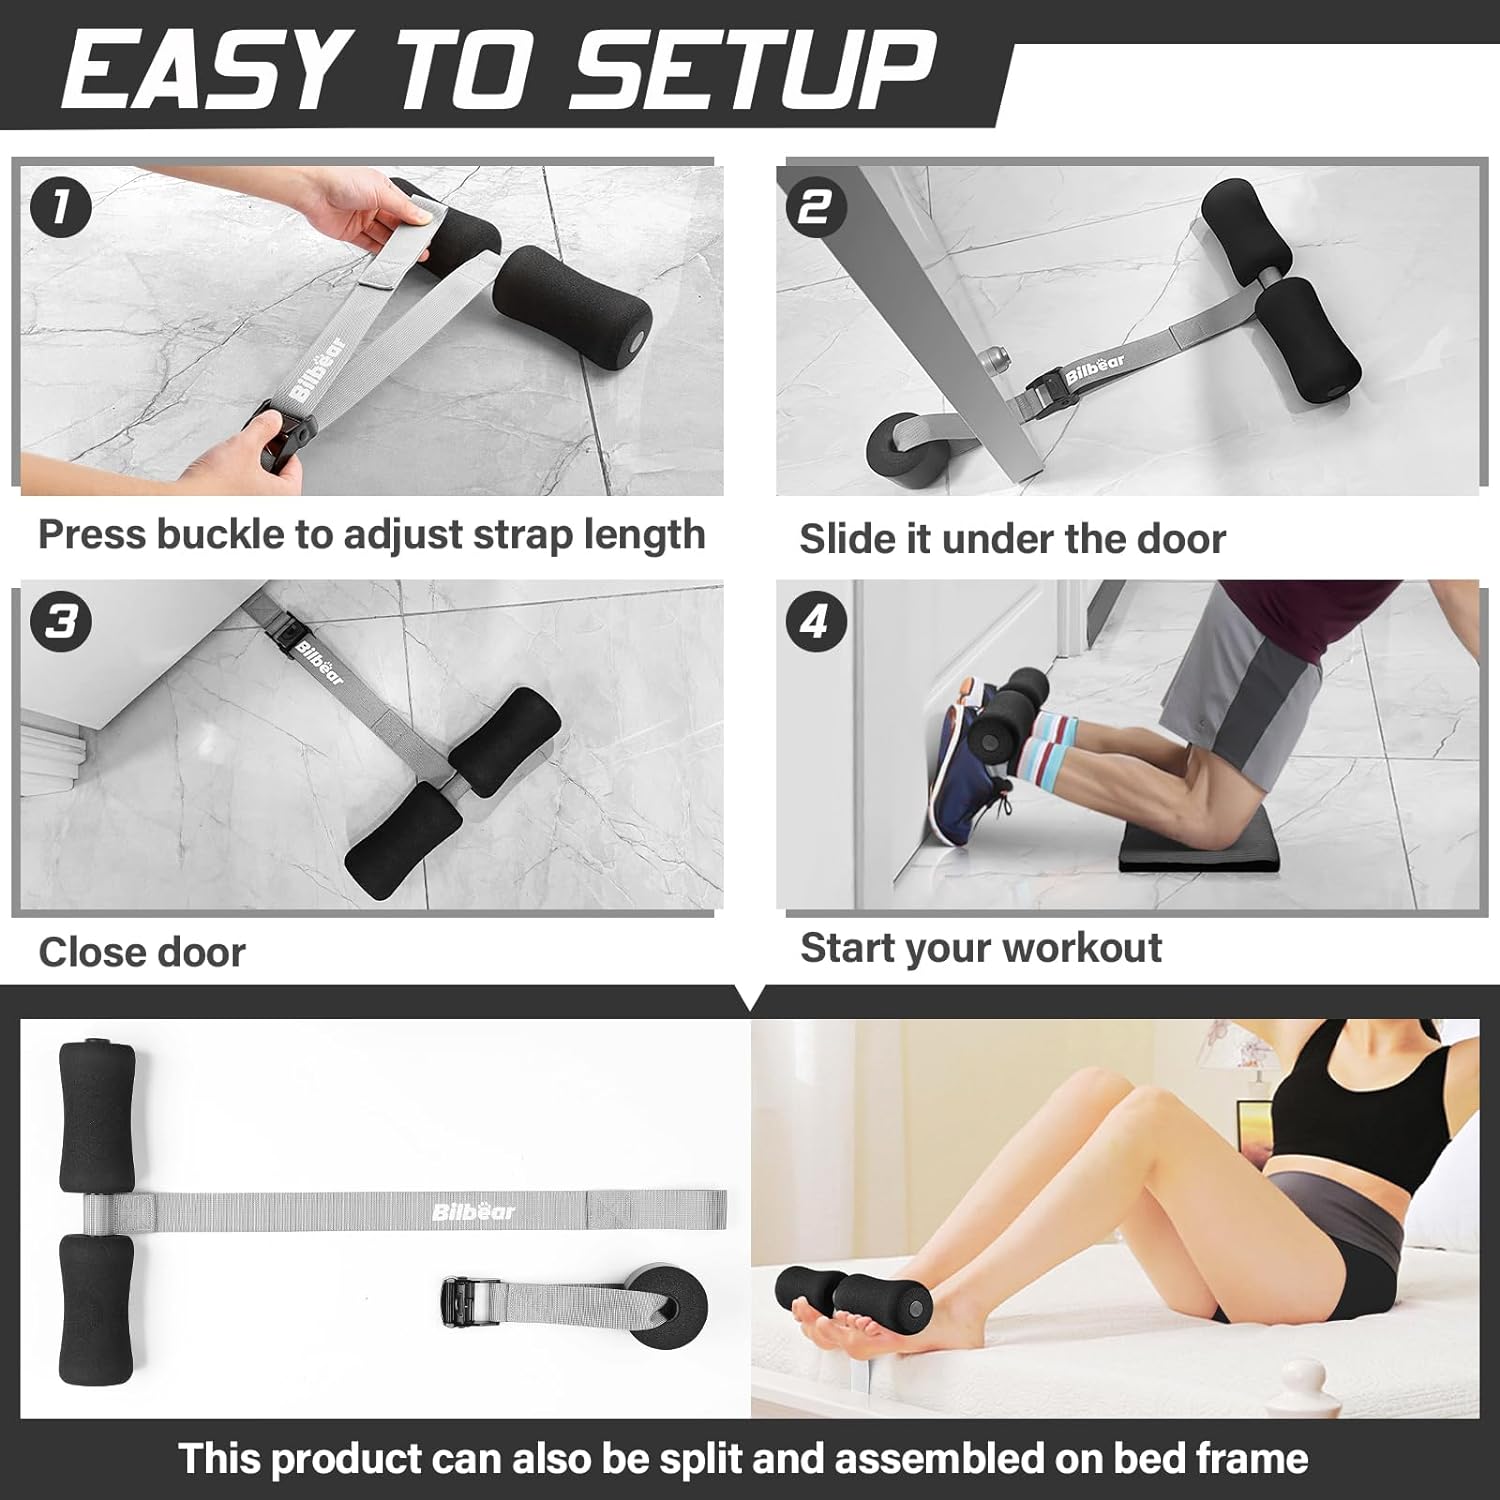 Experience Ultimate Leg Strength with the Adjustable Hamstring Curl Strap!